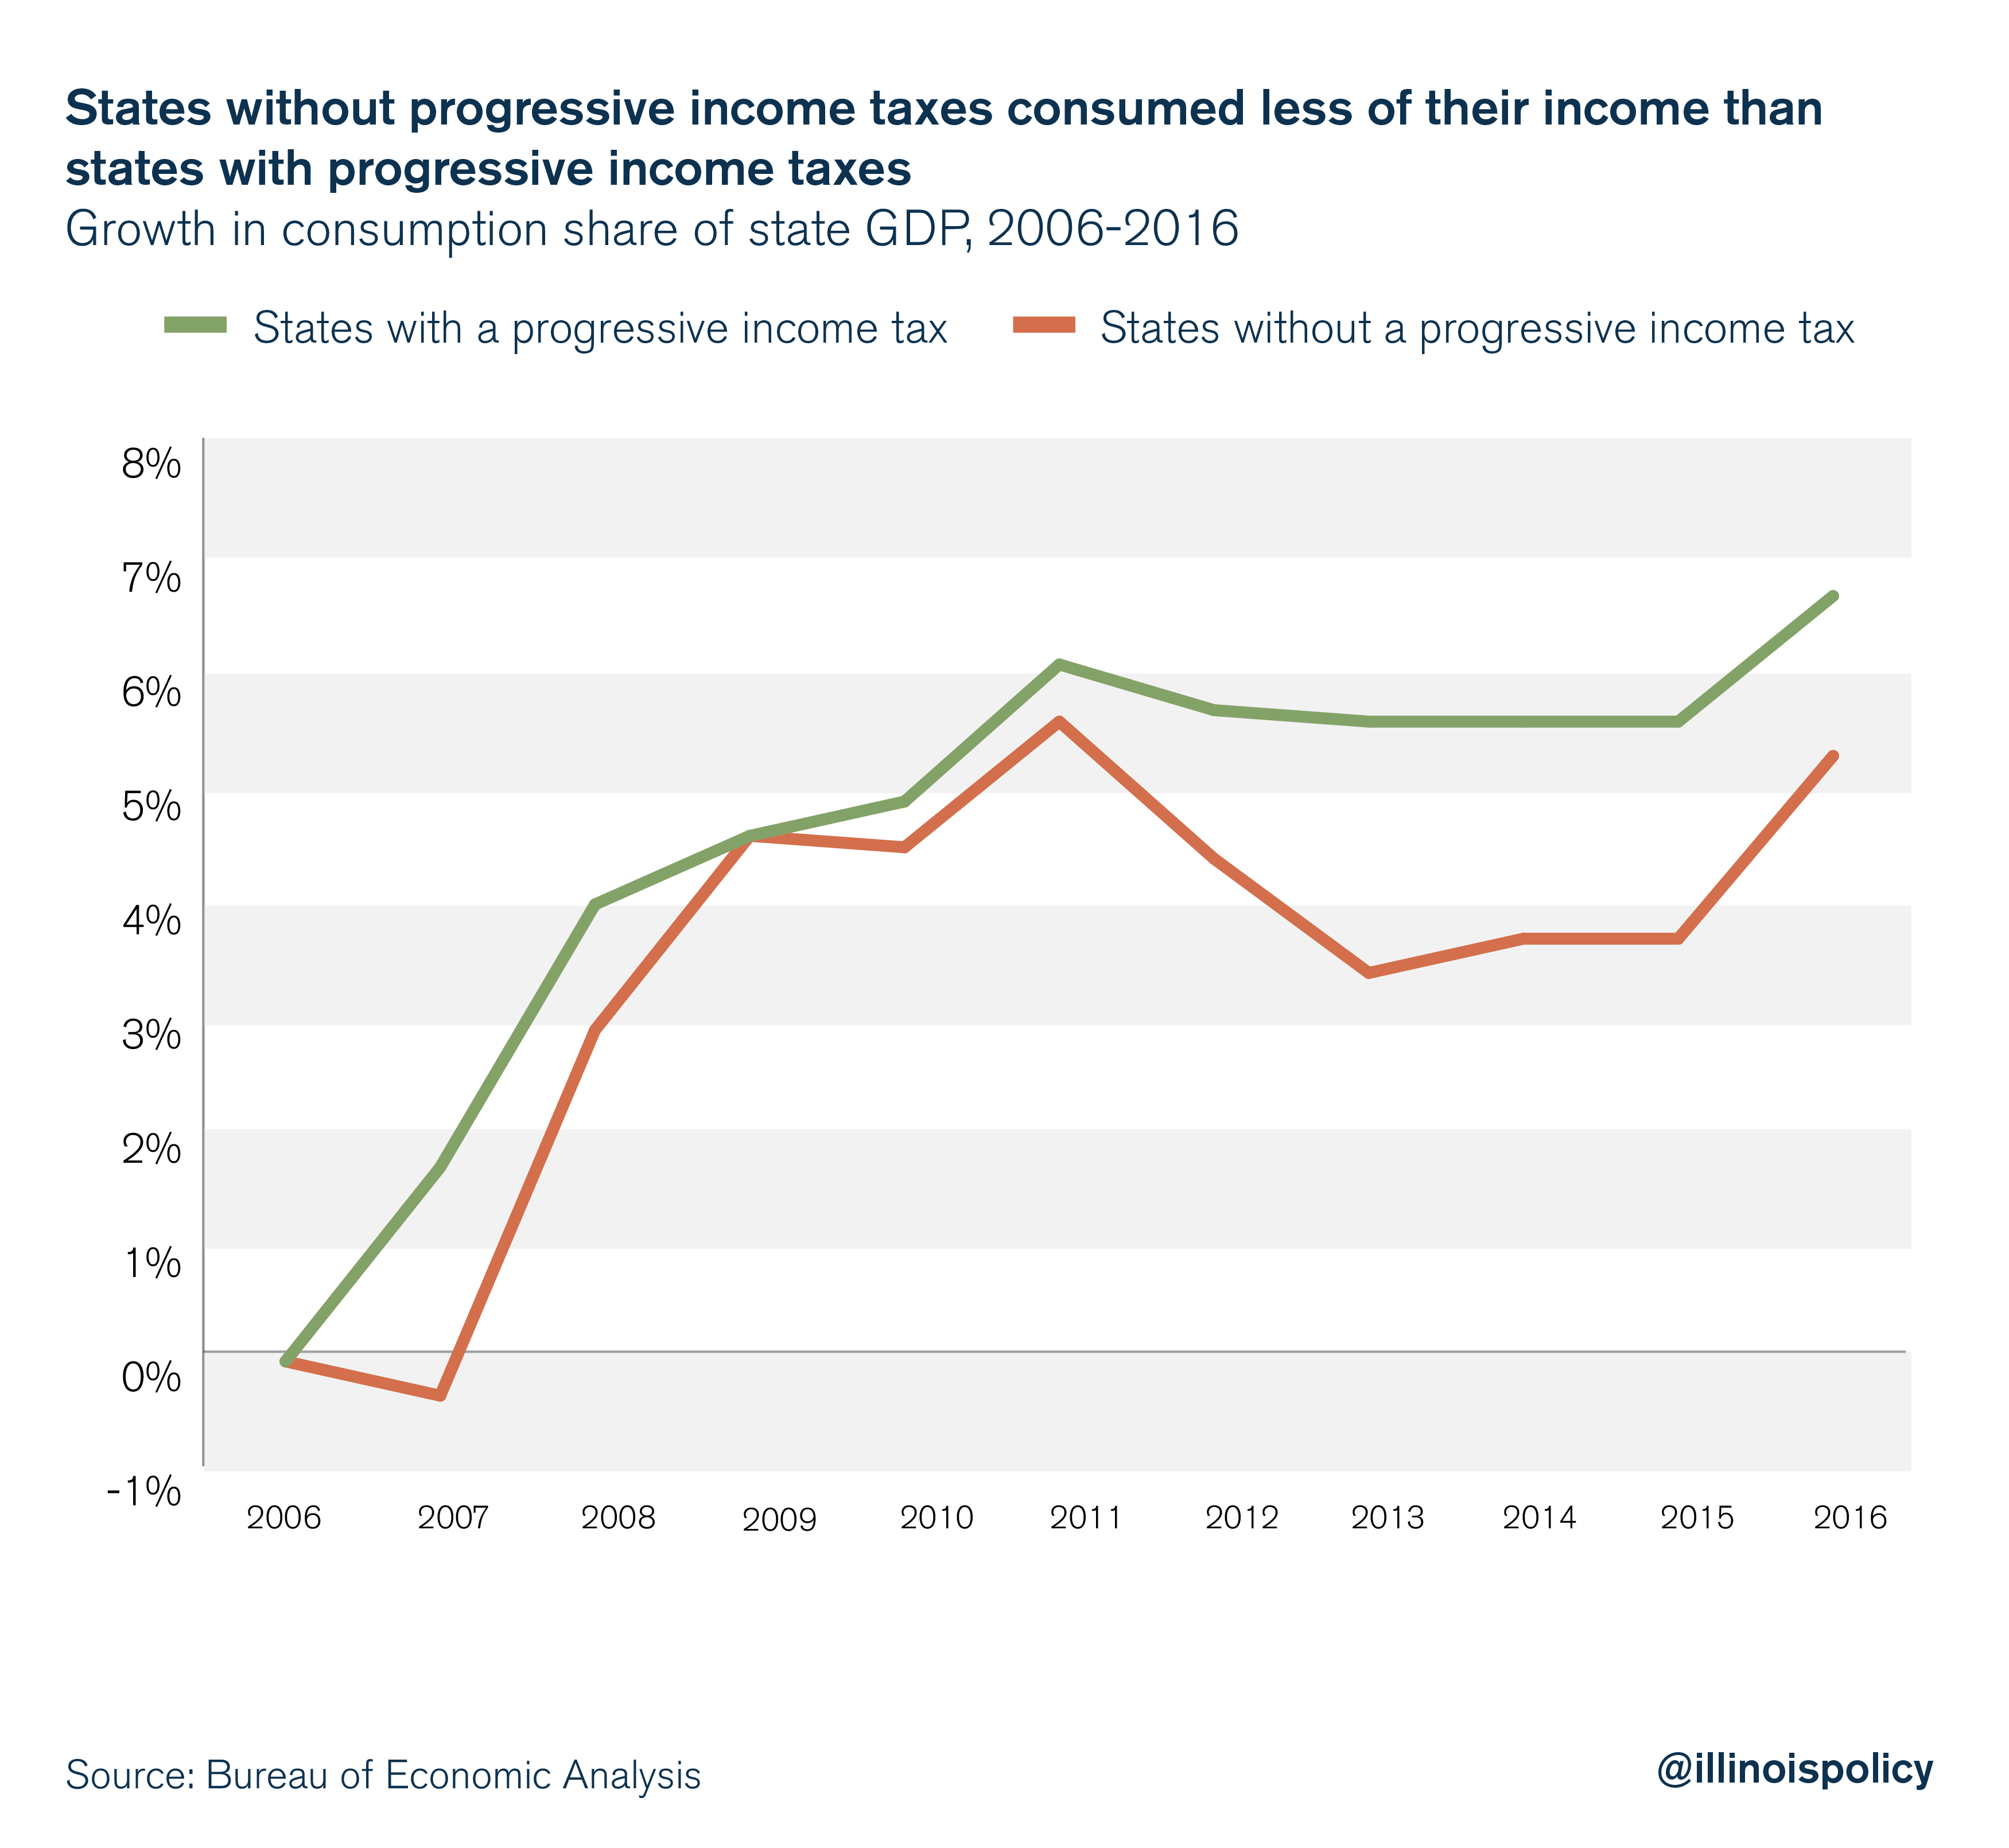 States without progressive income taxes consumed less of their income than states with progressive income taxes